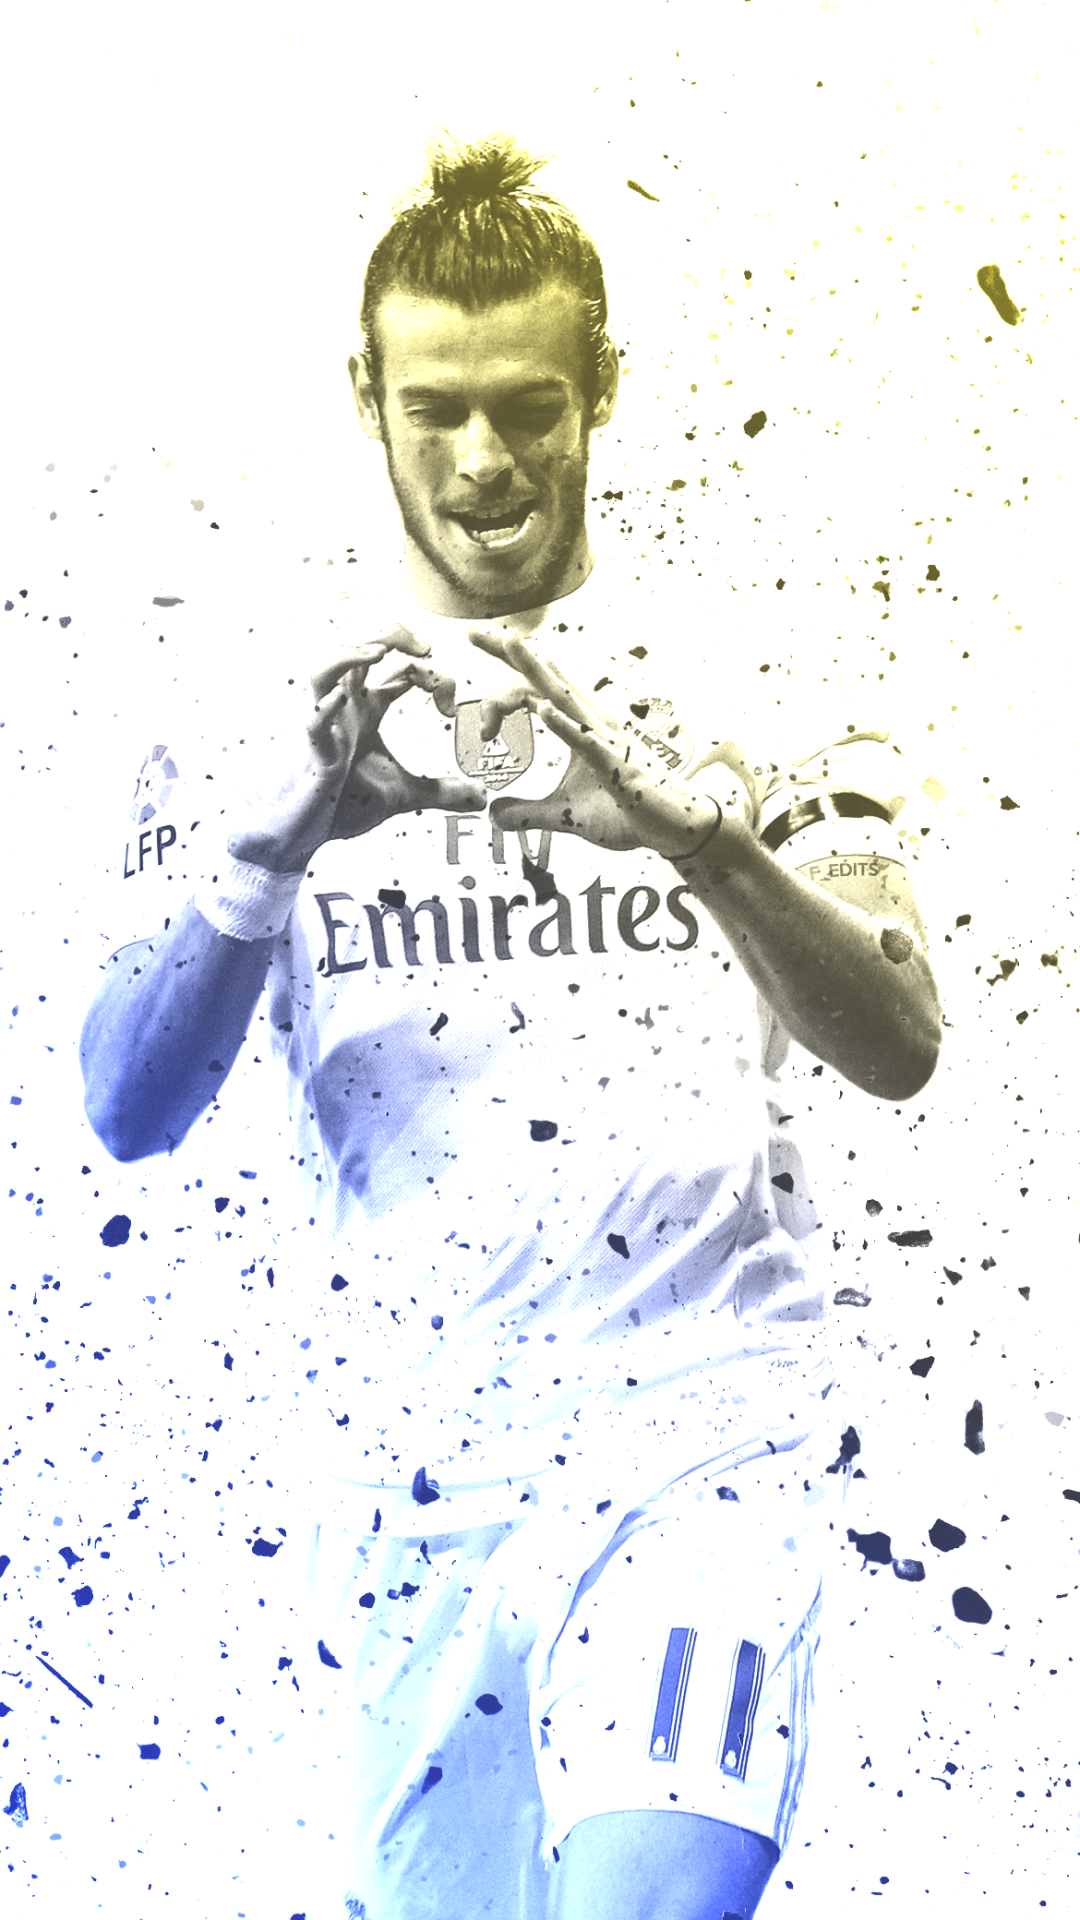 Gareth Bale Wallpapers (36+ images inside)